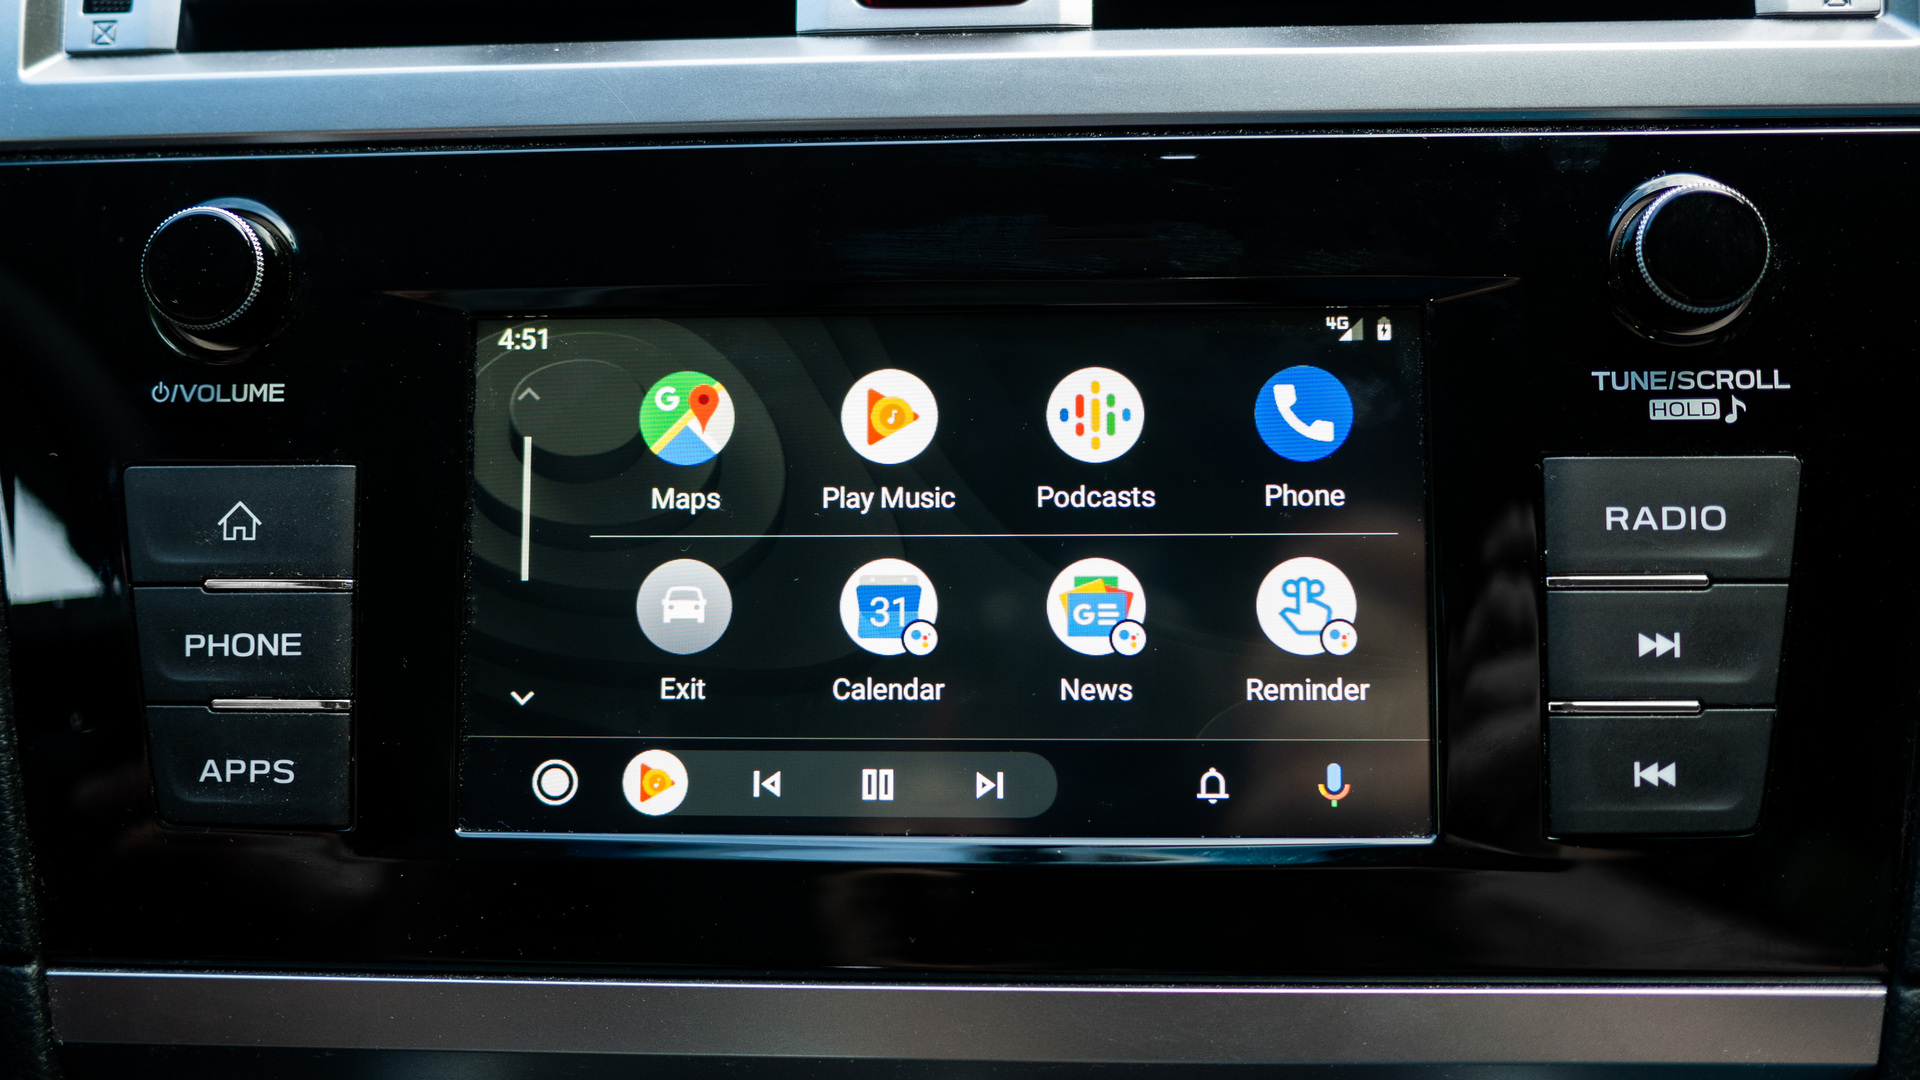 Android Auto Redesign main interface